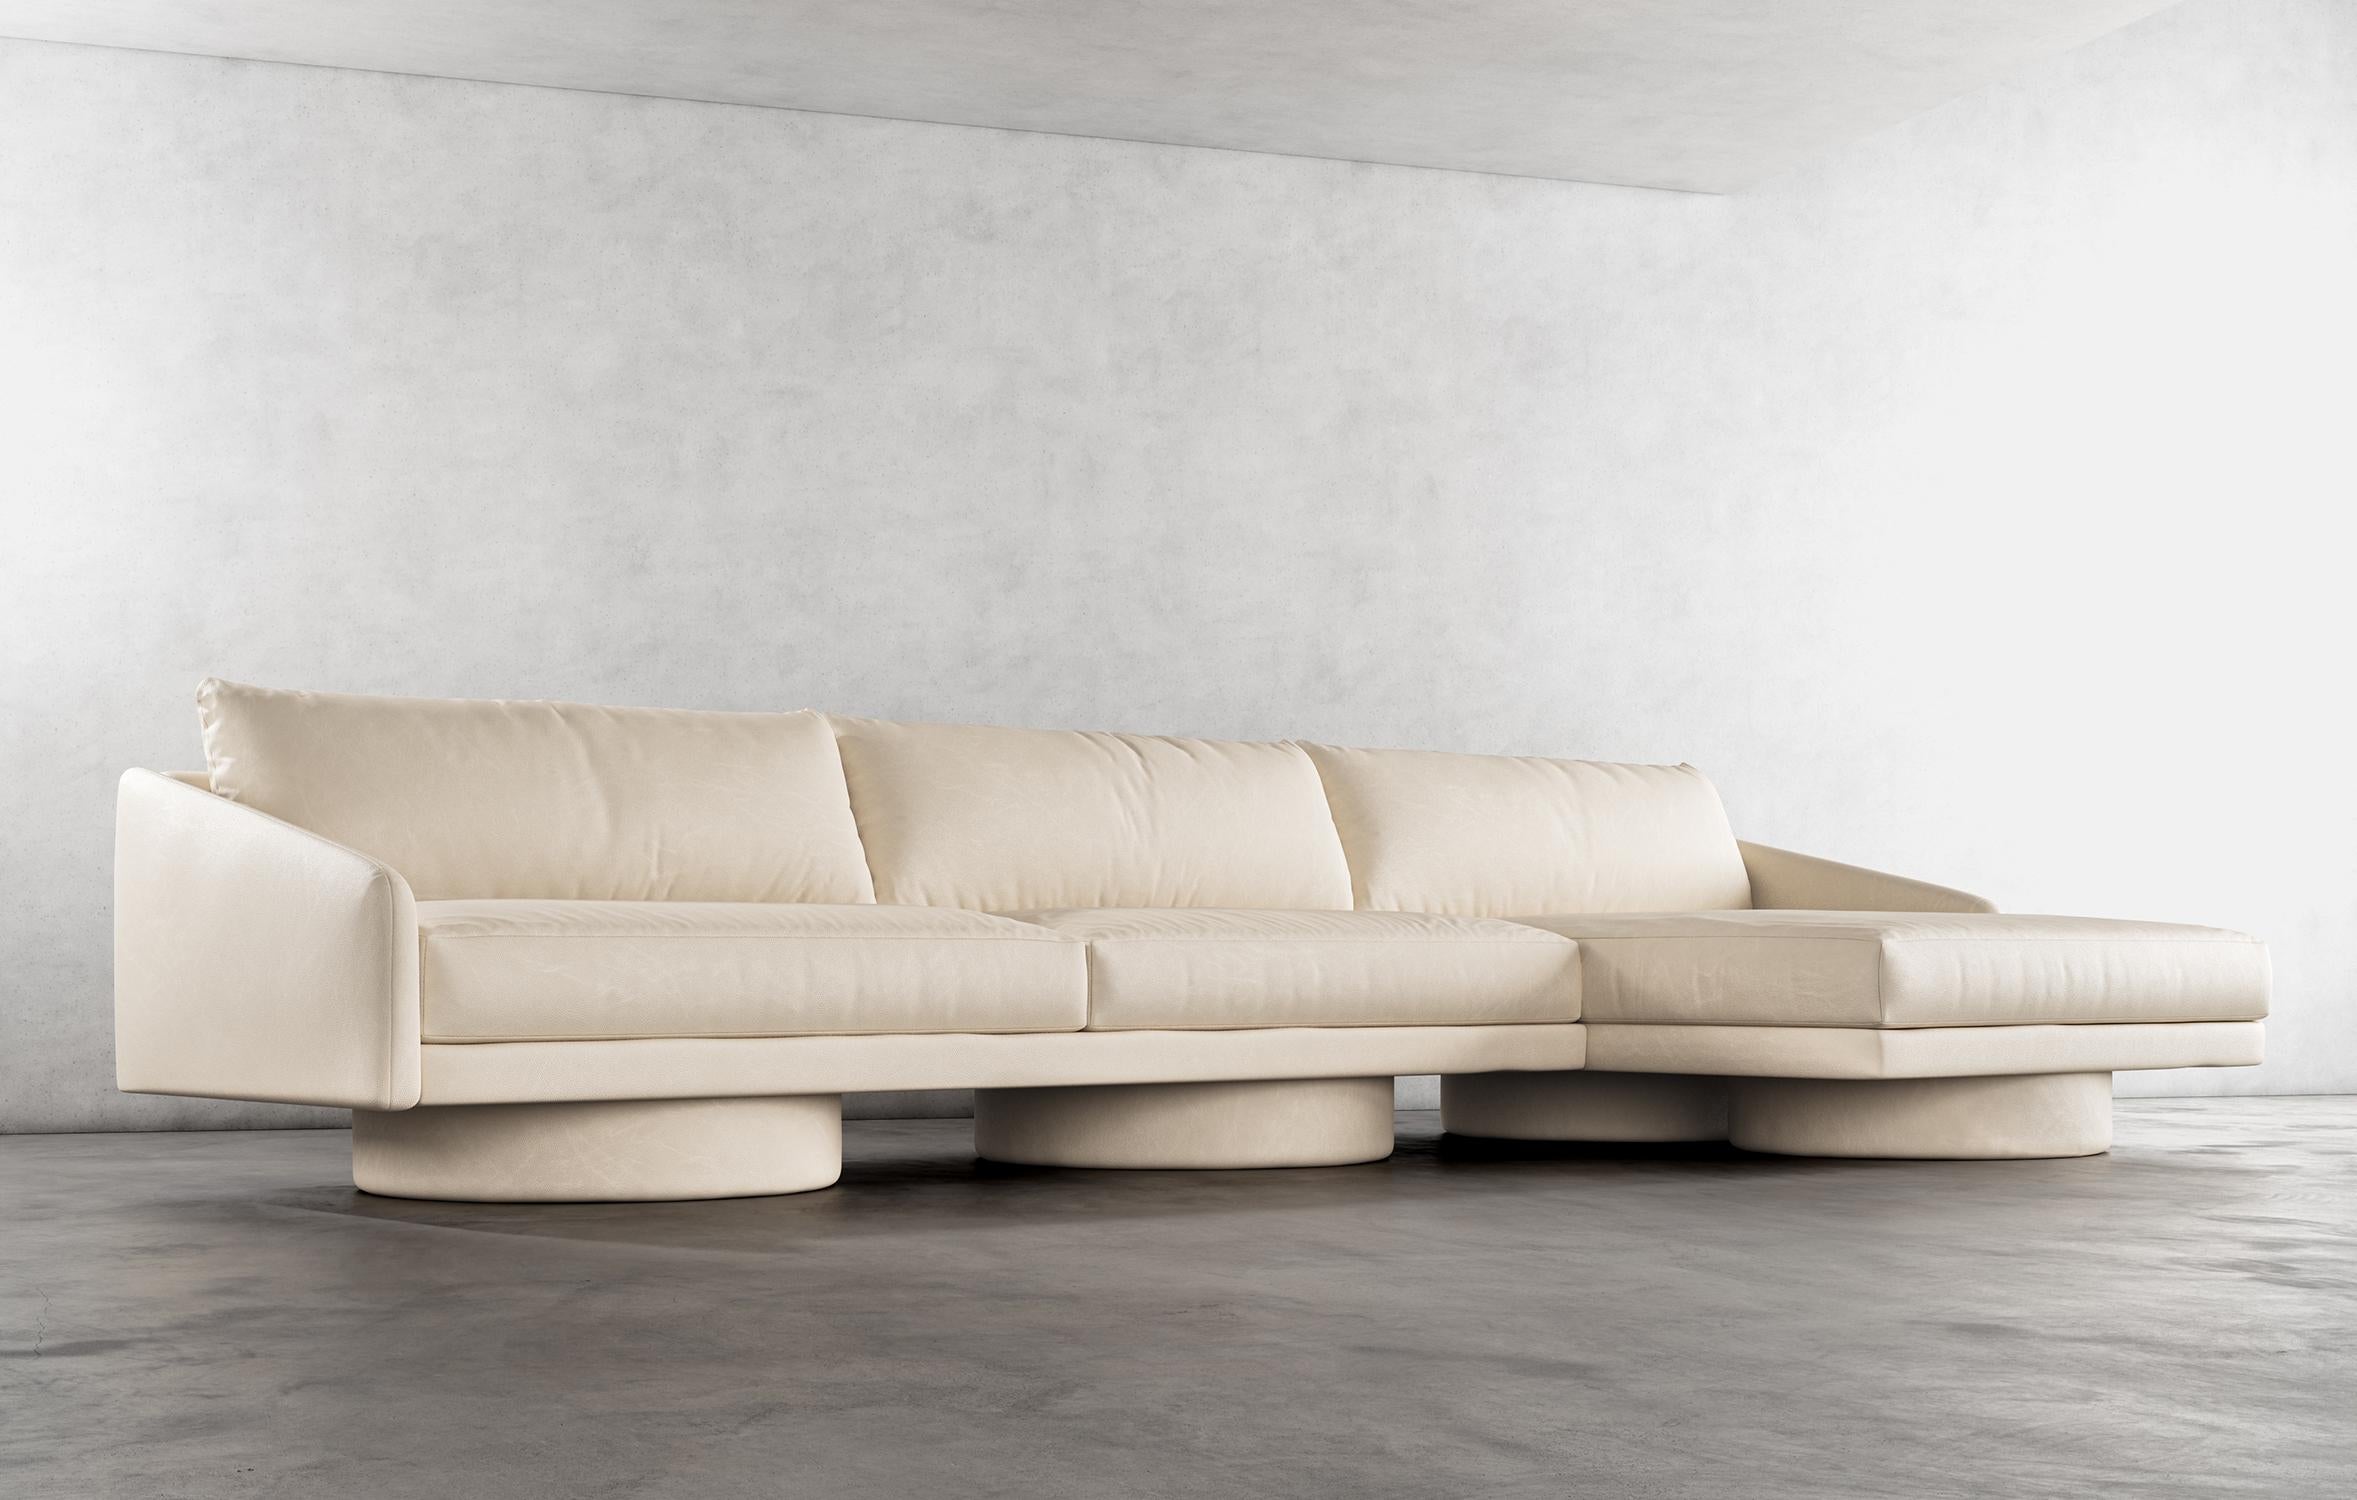 SURGE SECTIONAL - Modern Sectional Sofa in Cream Faux Leather

The Surge Sectional Sofa in cream faux leather is a luxurious and stylish piece of furniture that is perfect for any modern living room. This sectional features a sleek design with clean